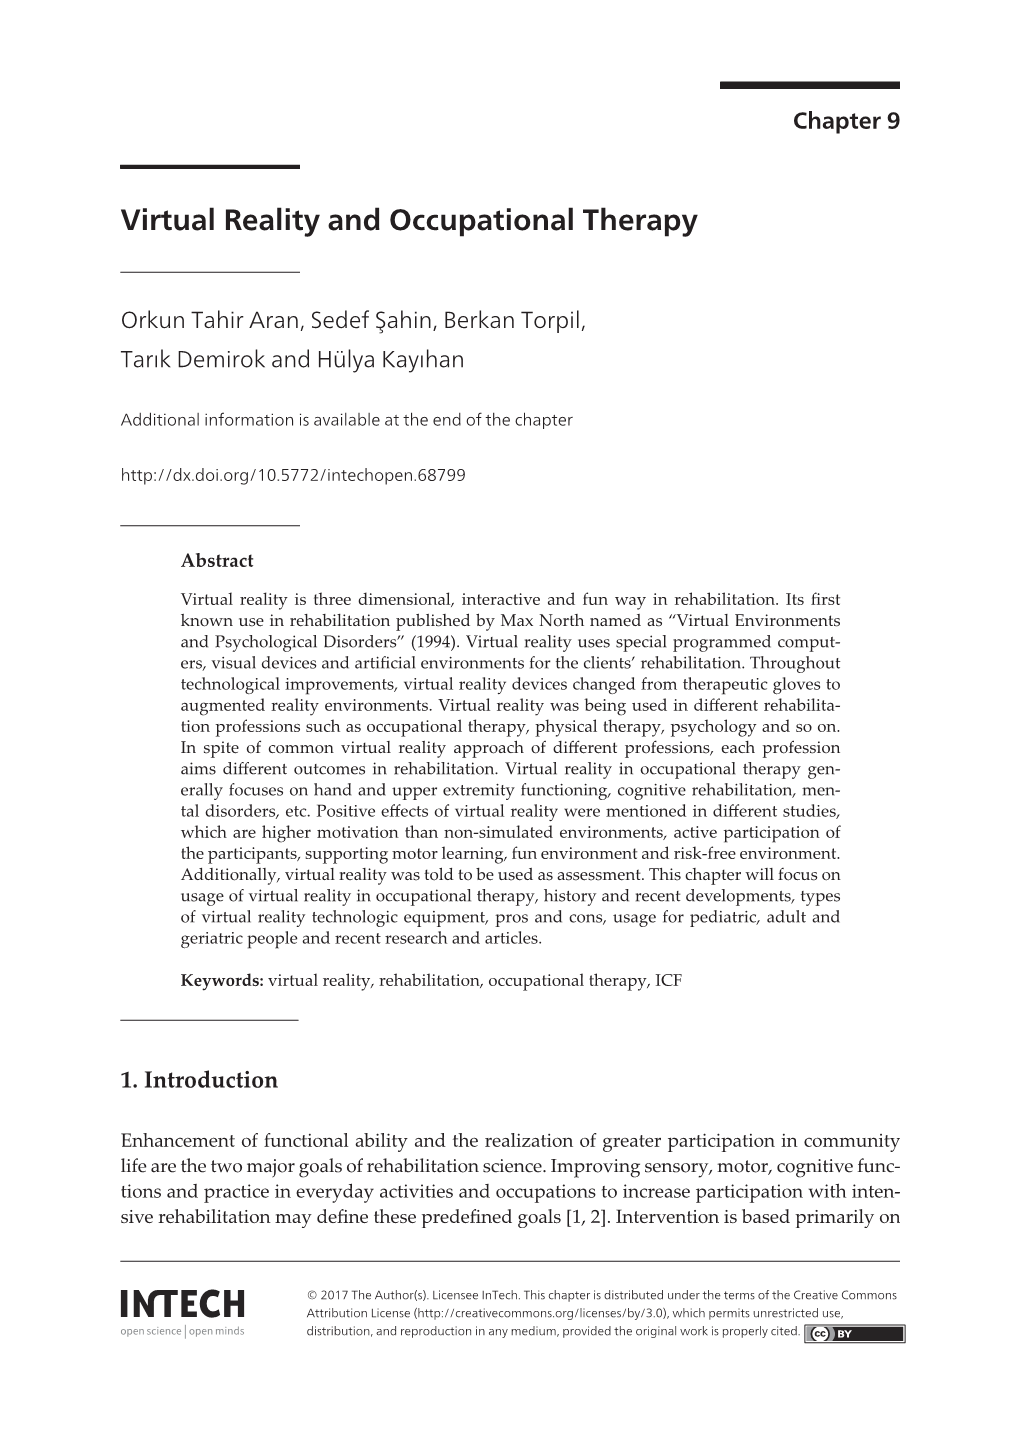 Virtual Reality and Occupational Therapy